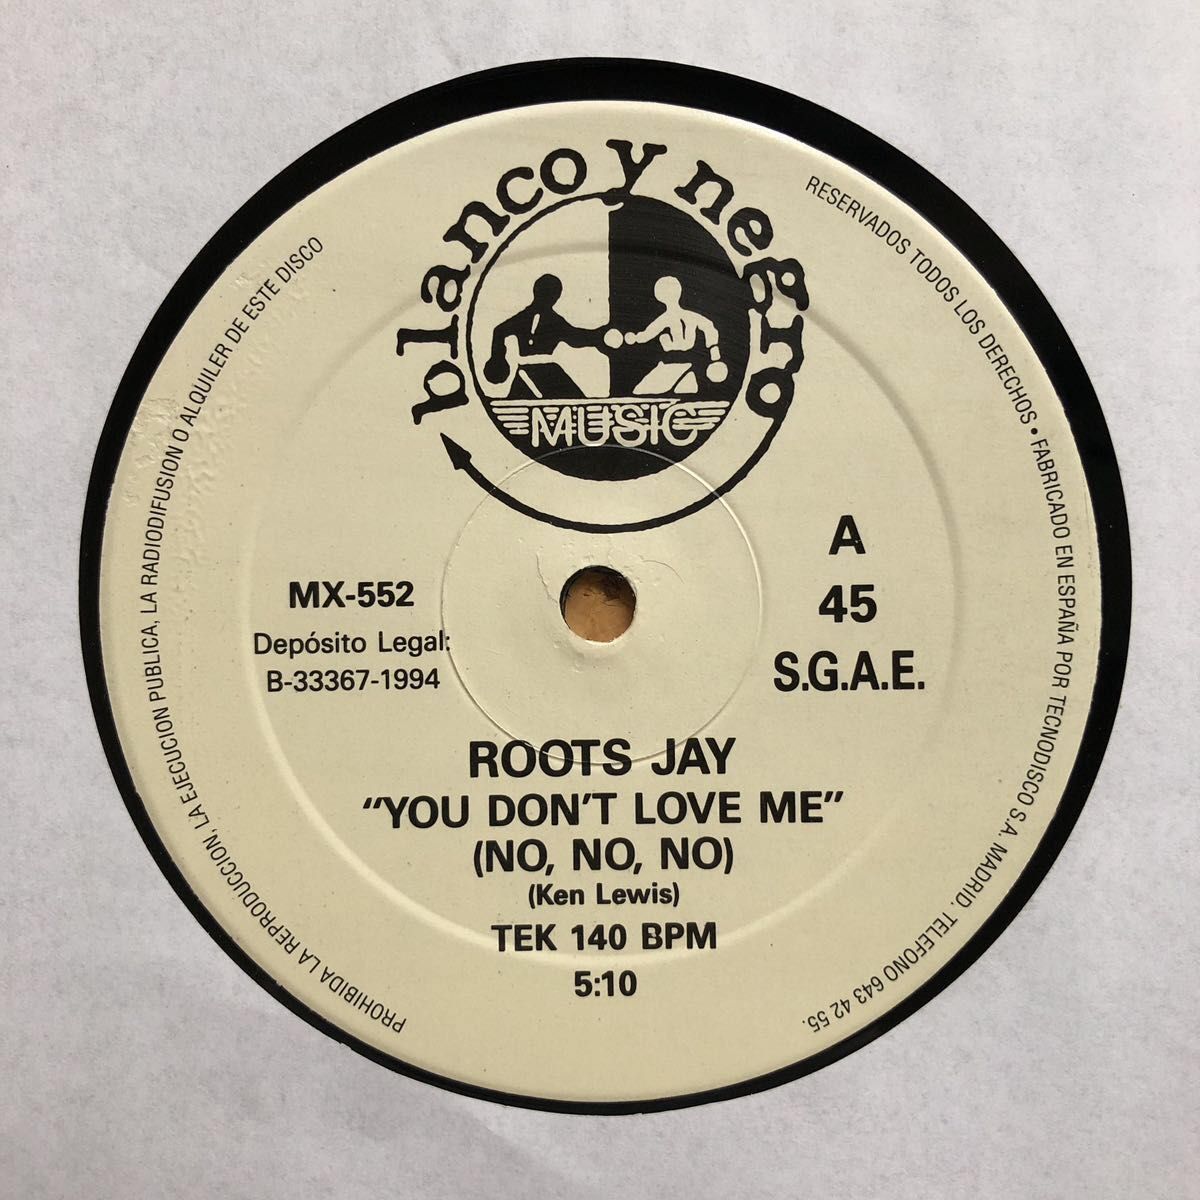 【r&b】Roots Jay / You Don't Love Me (No,No,No) ［12inch］《0-297》